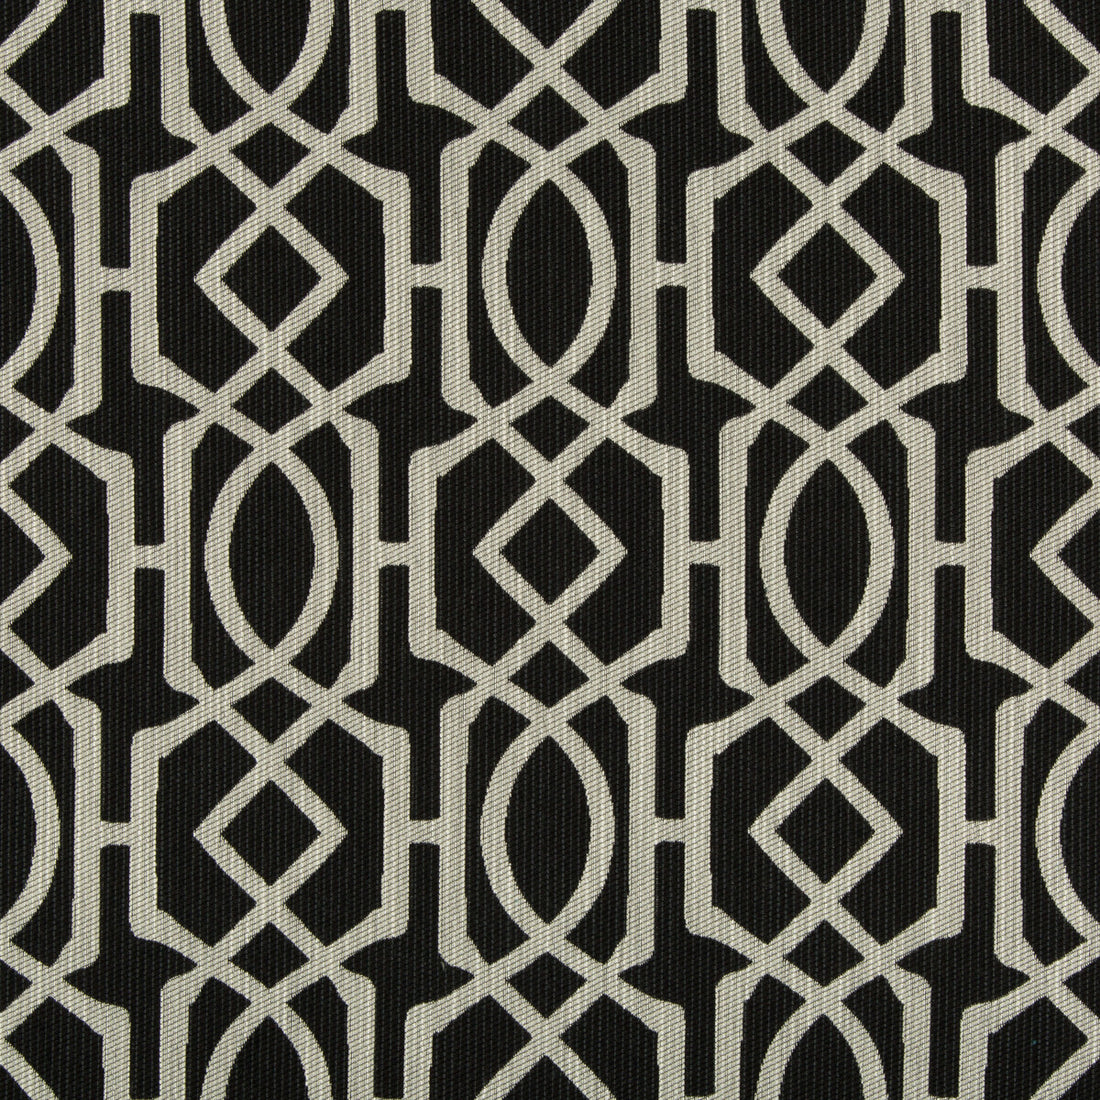 Kravet Design fabric in 34700-8 color - pattern 34700.8.0 - by Kravet Design in the Performance Crypton Home collection